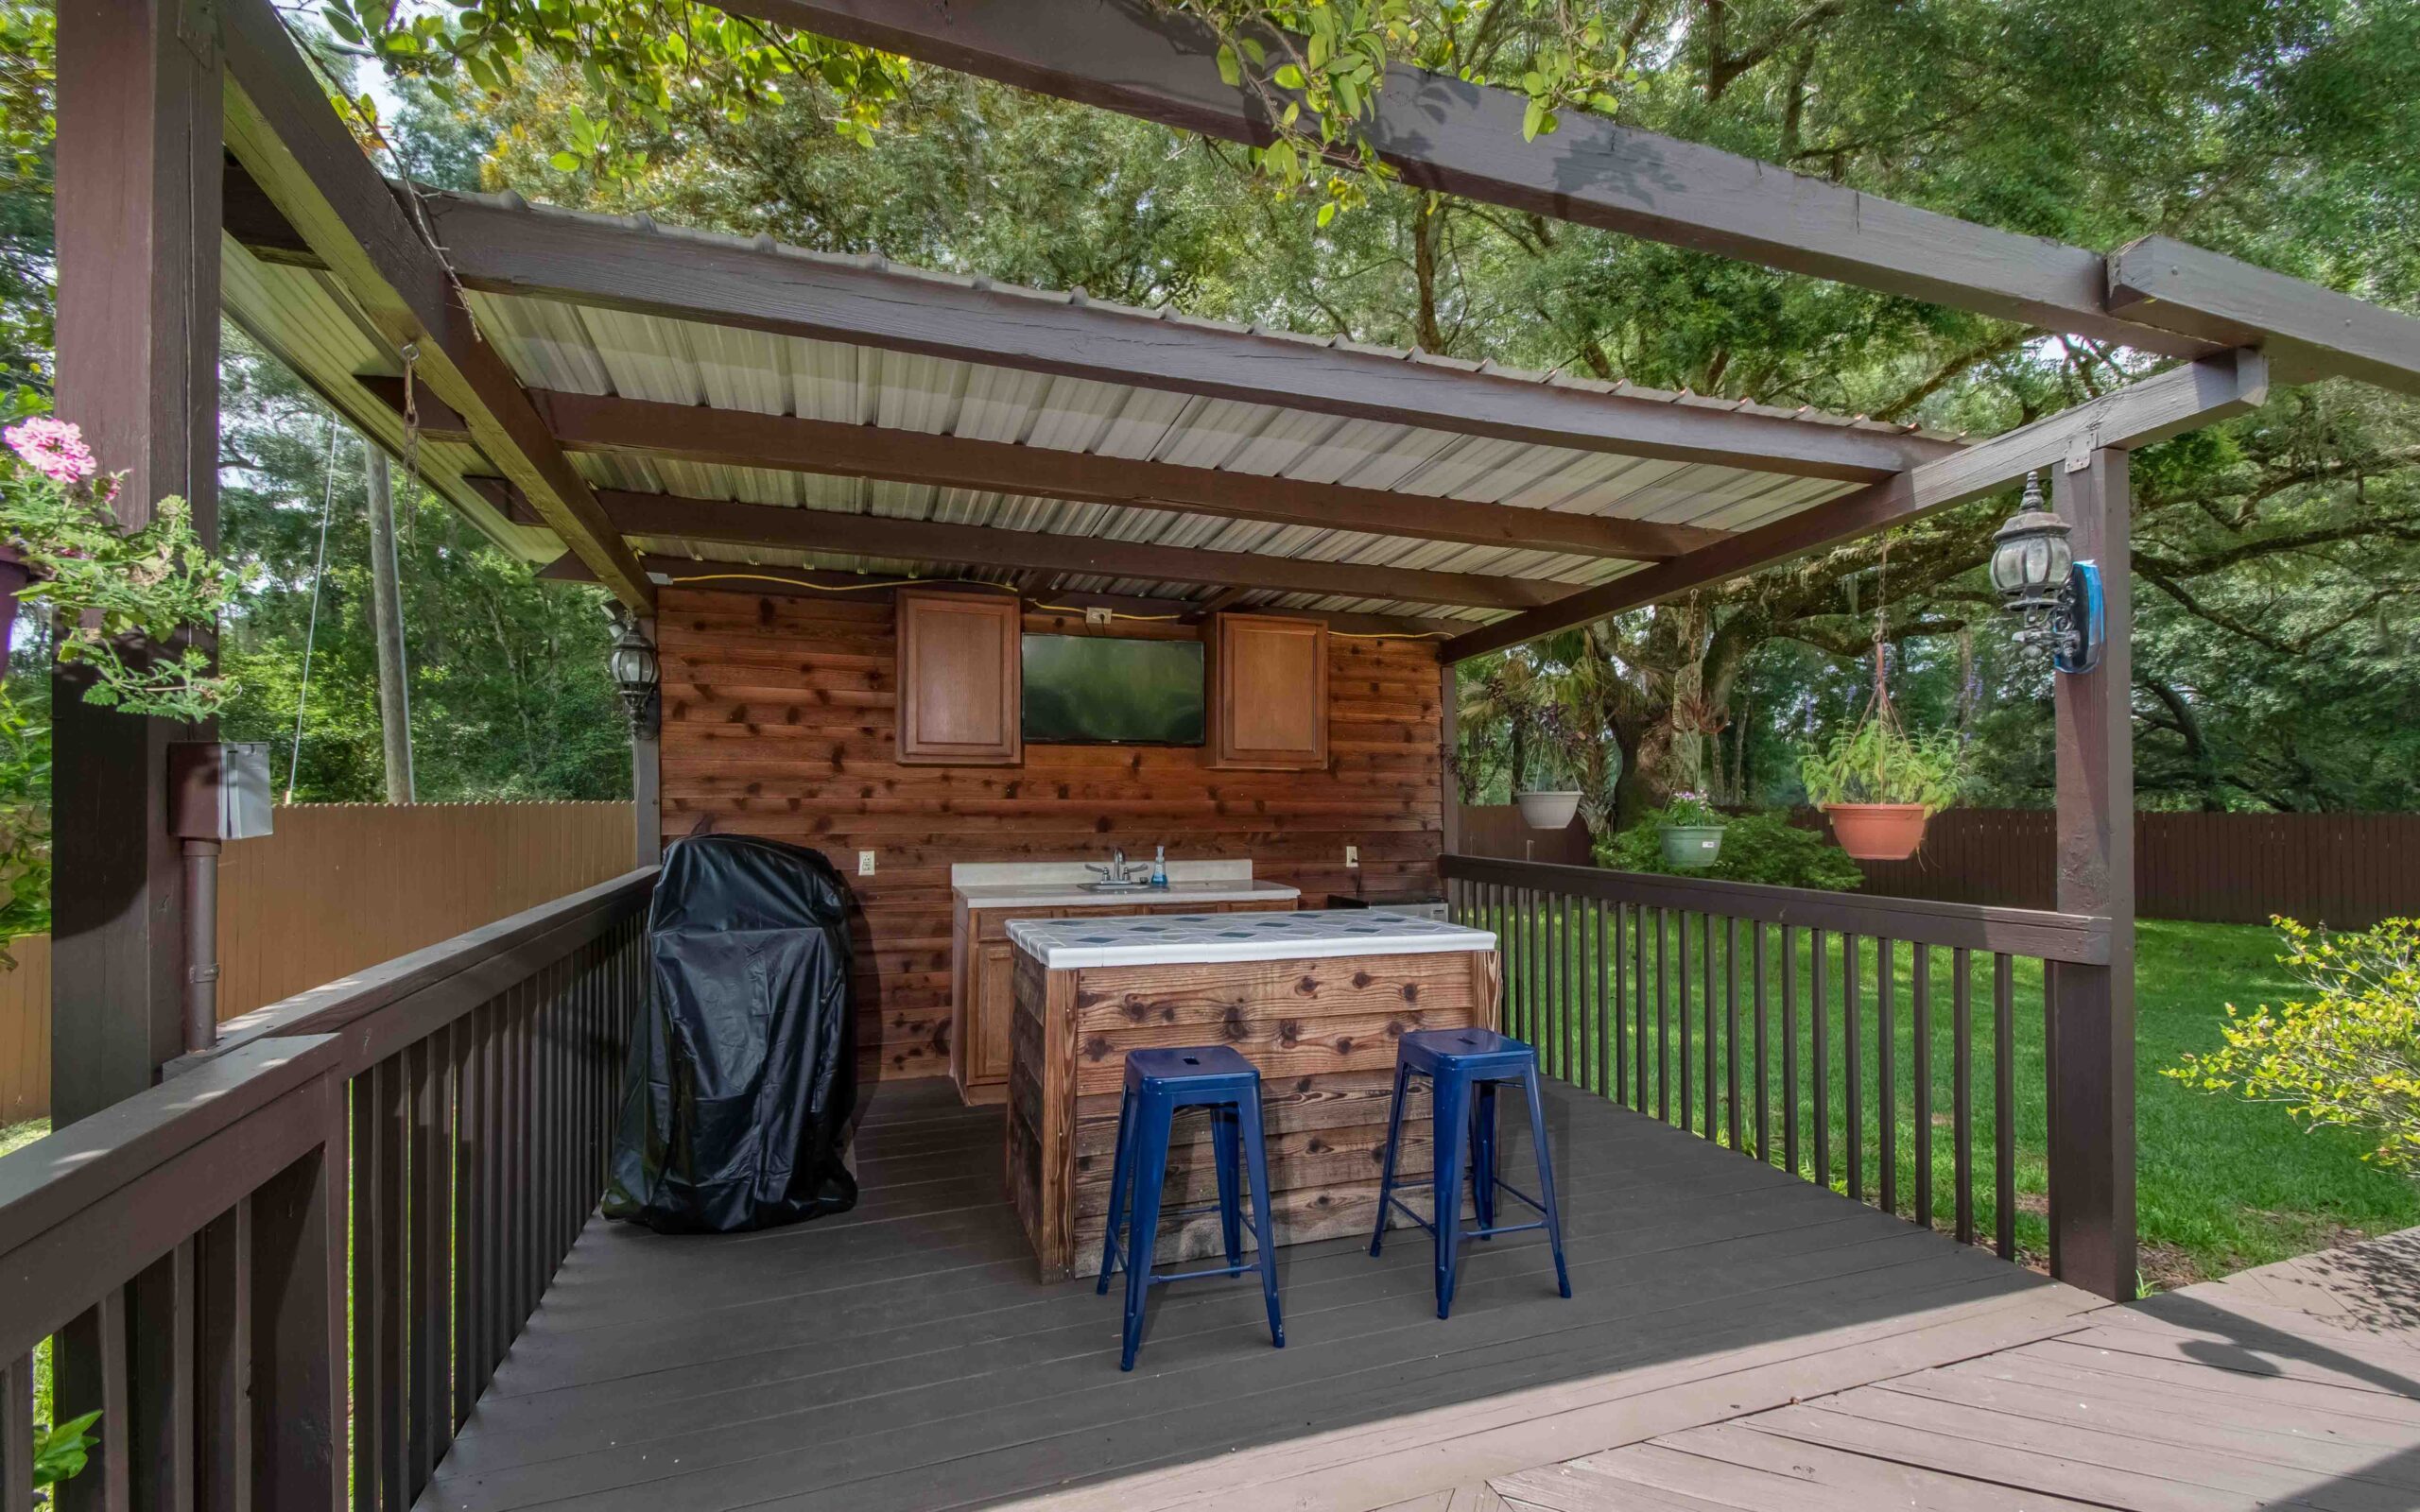 Outdoor kitchen area at Webster Training Center in Ocala, Florida